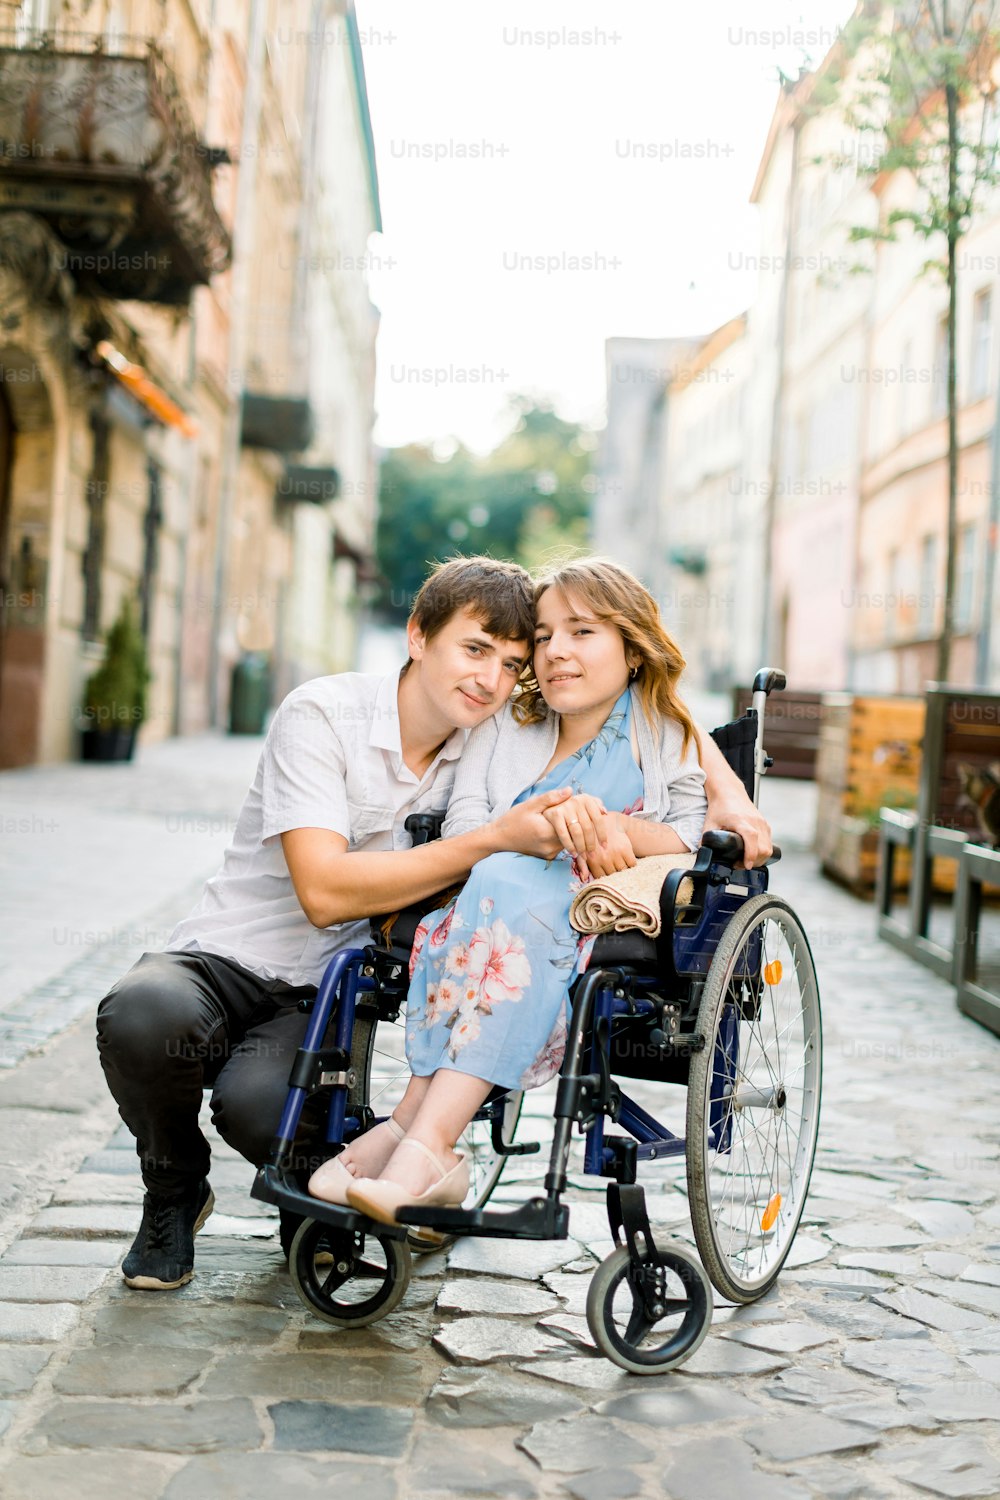 Pretty young smiling woman in the wheelchair and handsome man looking at camera, holding hands, in love, walking in the old city center